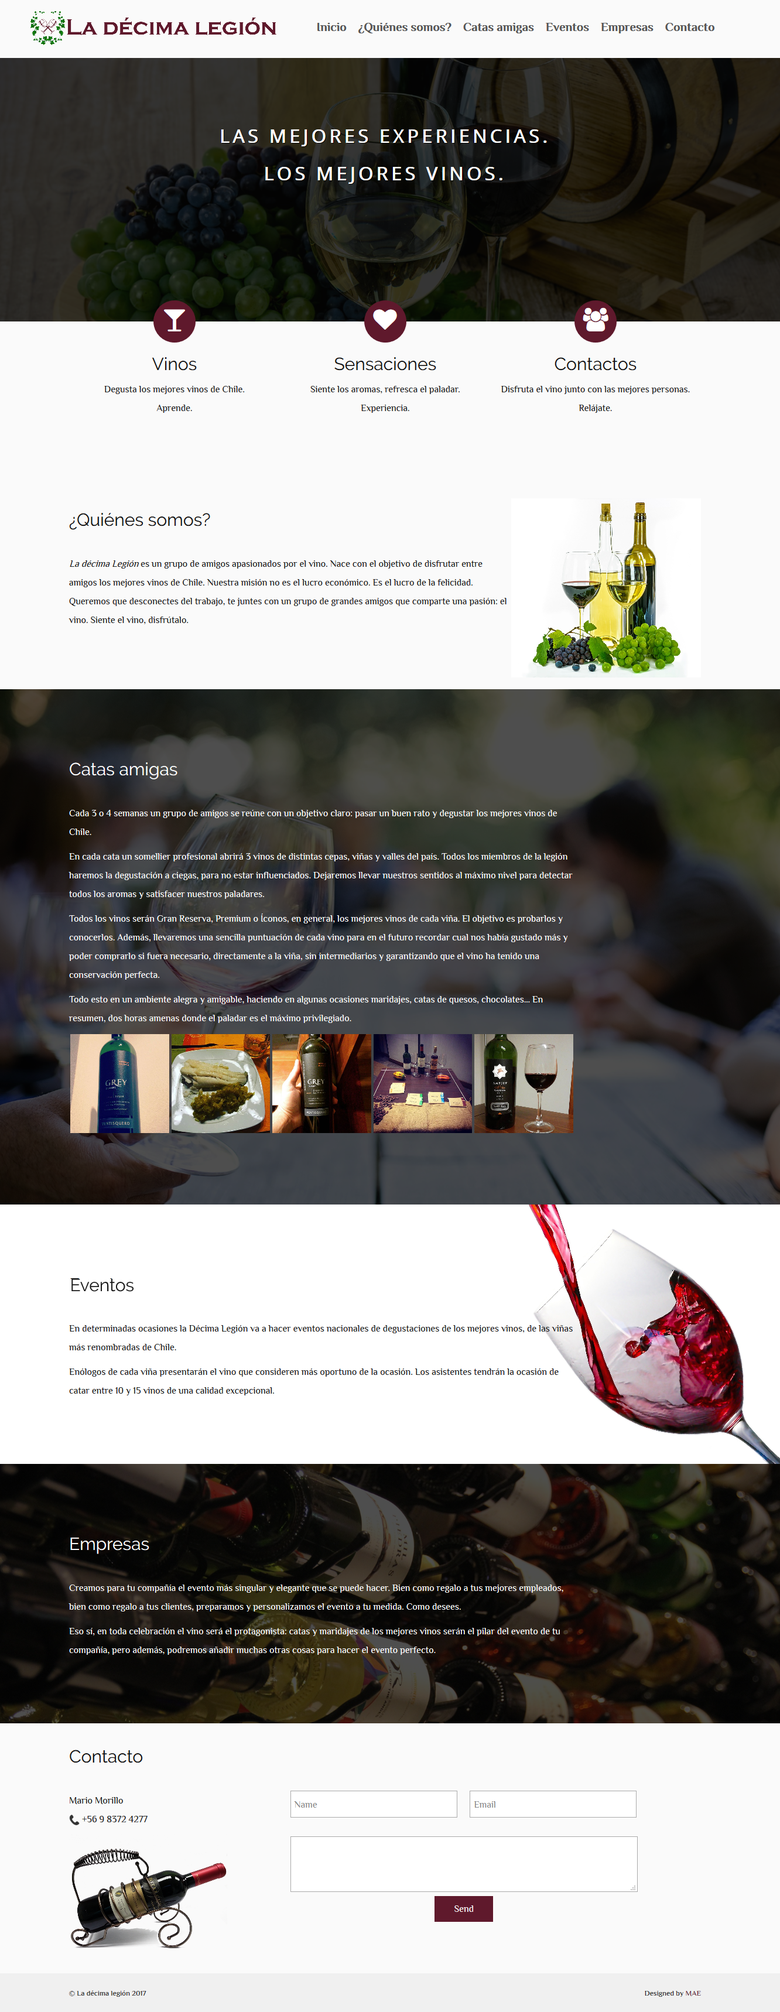 Website design with HTML and CSS